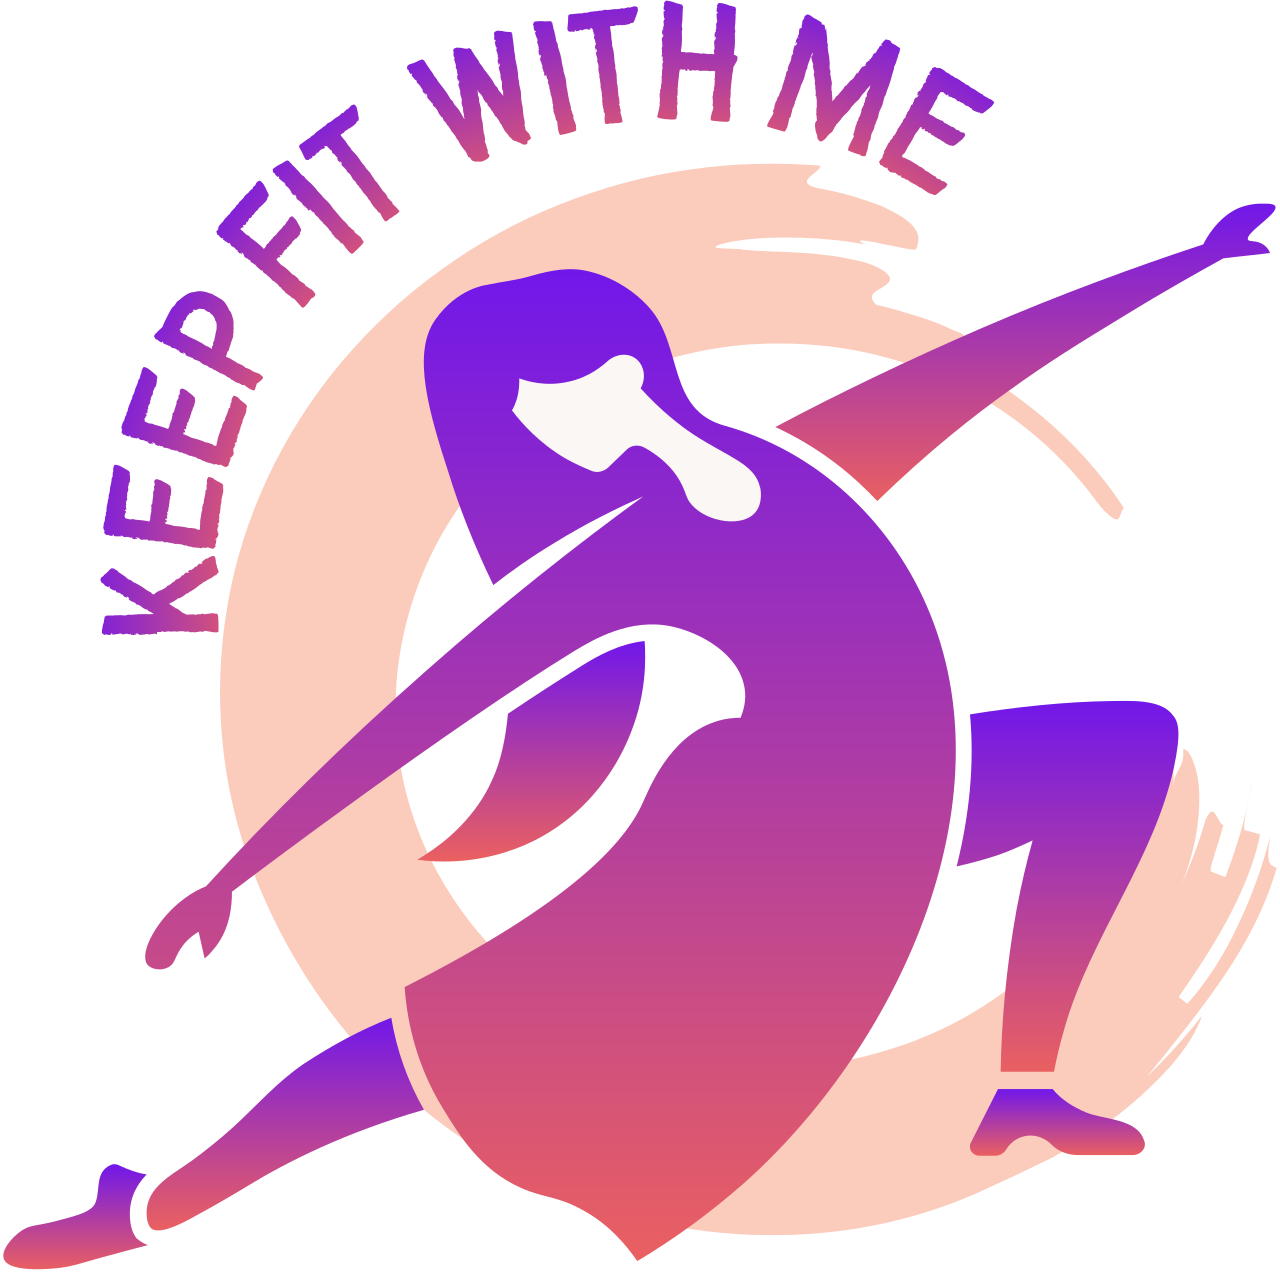 KEEP FIT WITH ME's logo